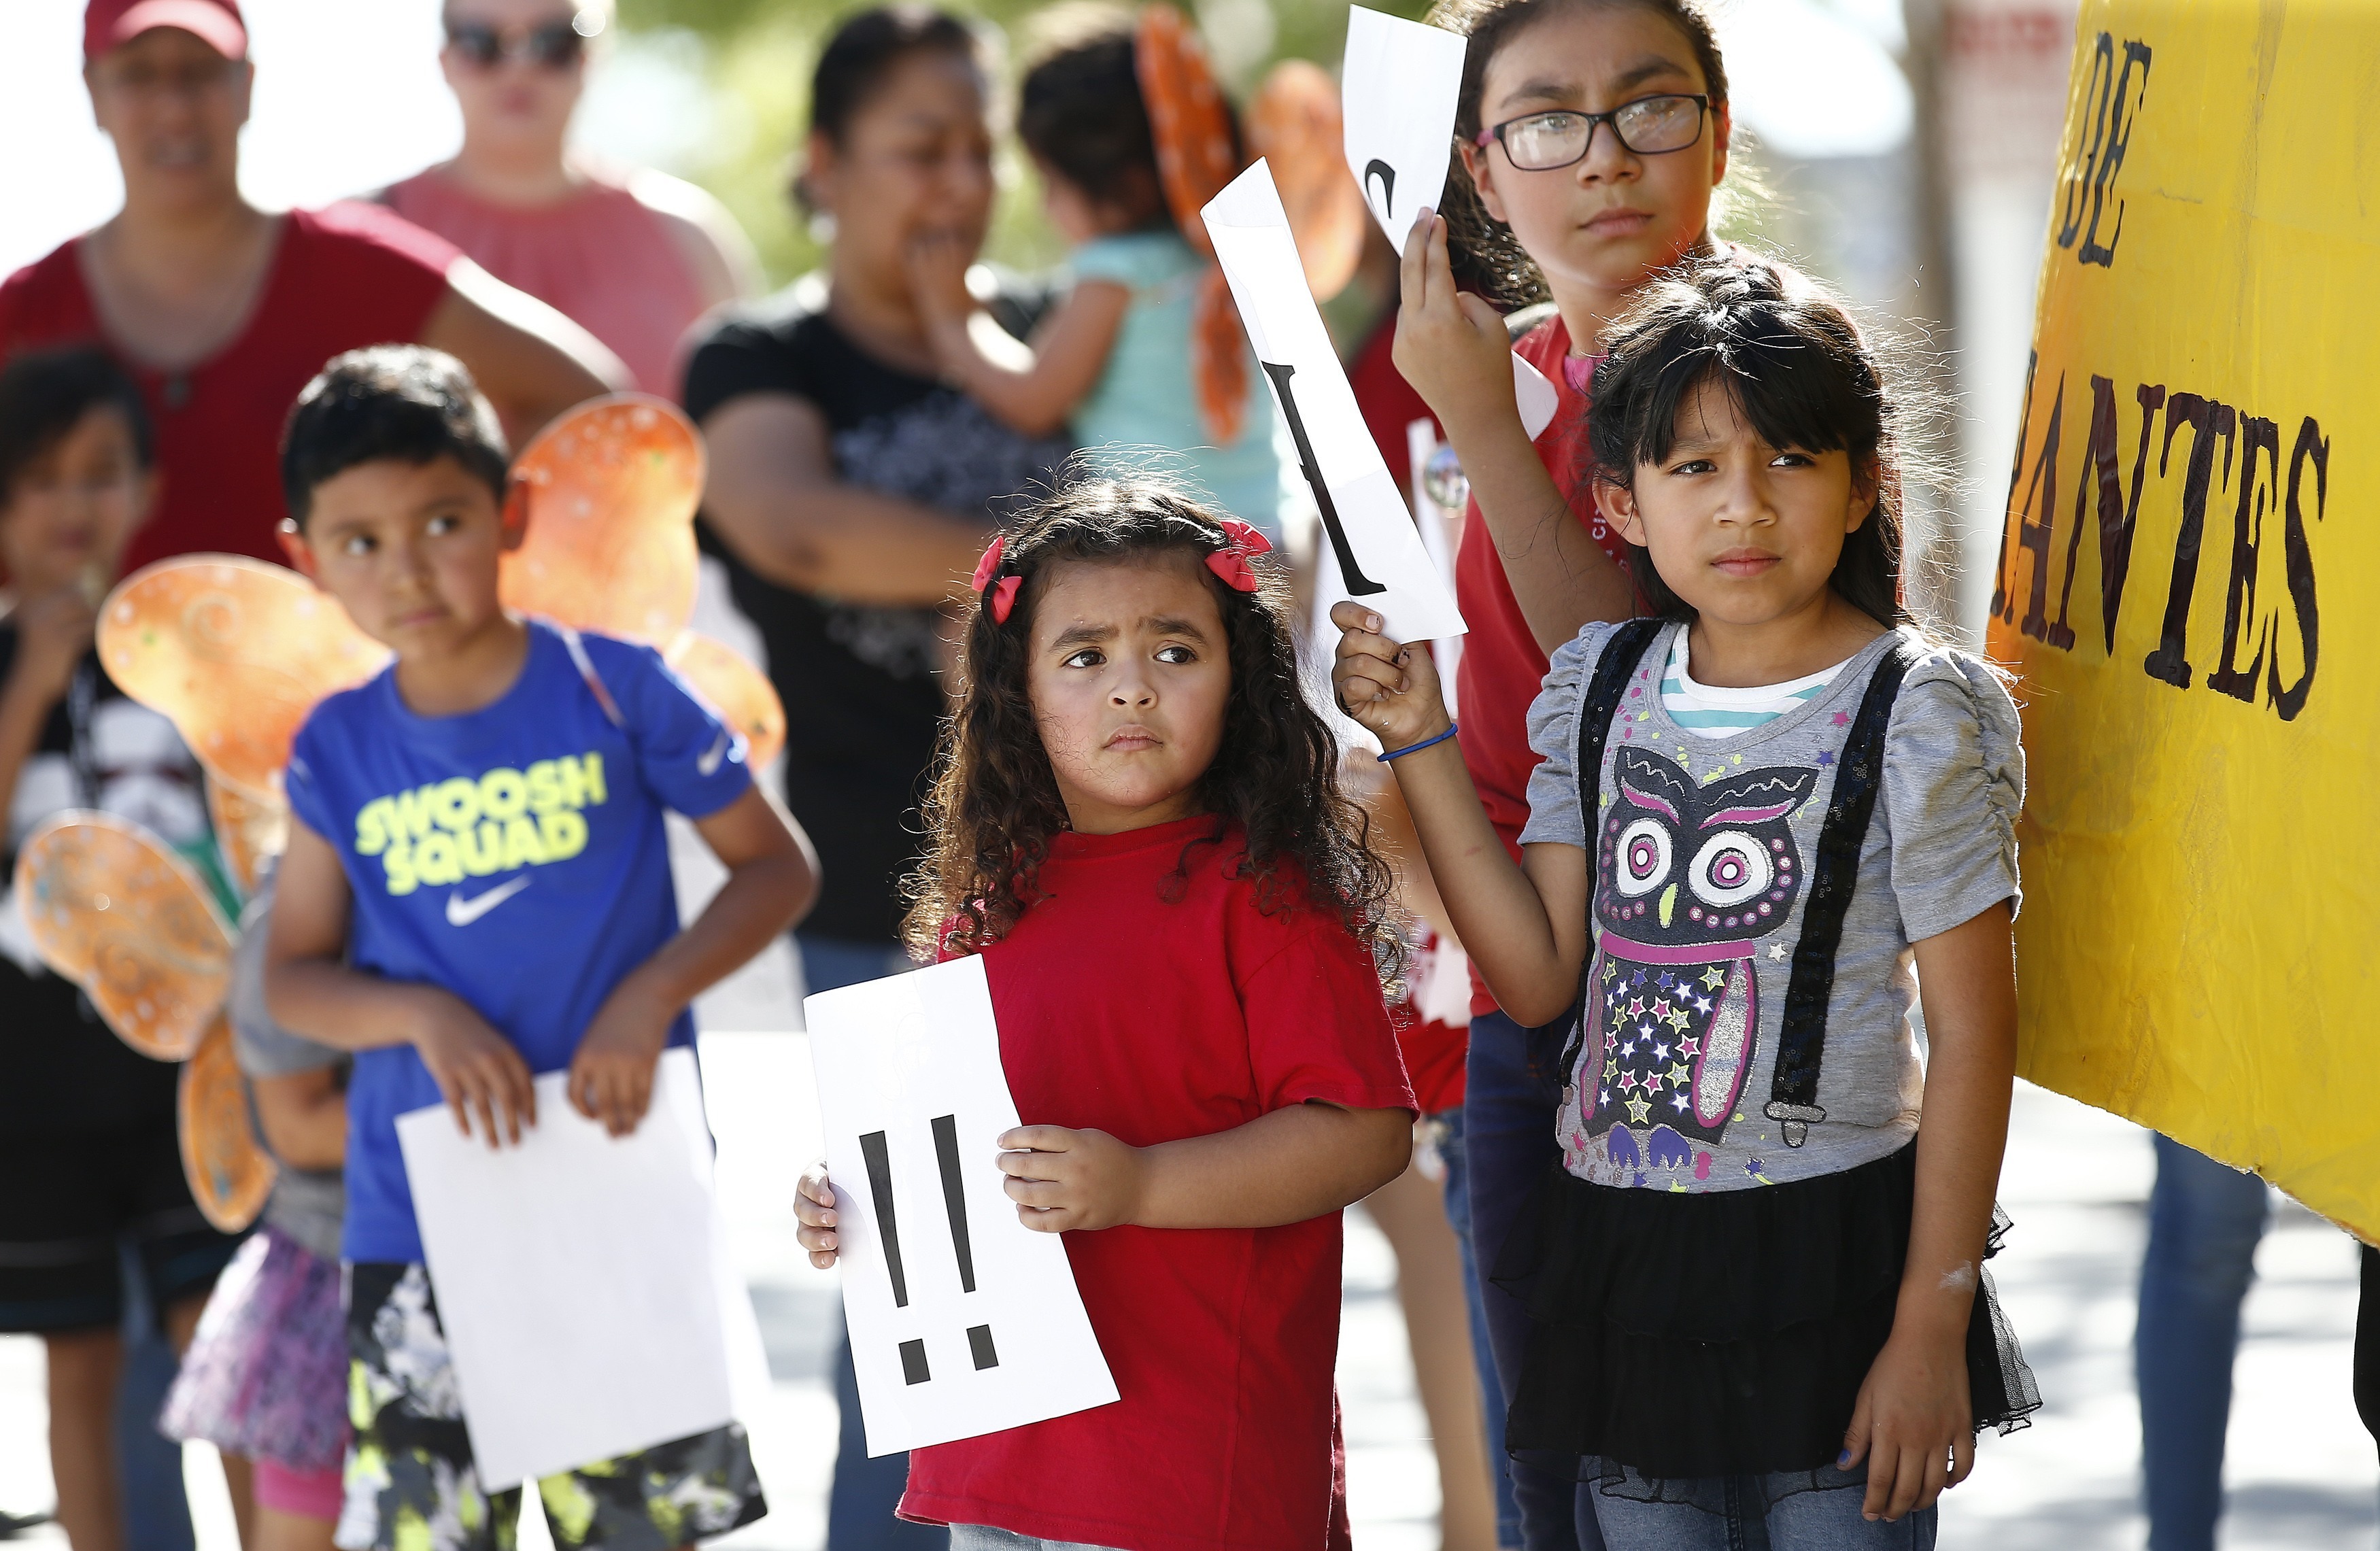 Children listen to speakers during an immigration family separation protest in front of the Sandra Day O'Connor U.S. District Court building, Monday, June 18, 2018, in Phoenix. An unapologetic President Donald Trump defended his administration's border-protection policies Monday in the face of rising national outrage over the forced separation of migrant children from their parents. (AP Photo/Ross D. Franklin)